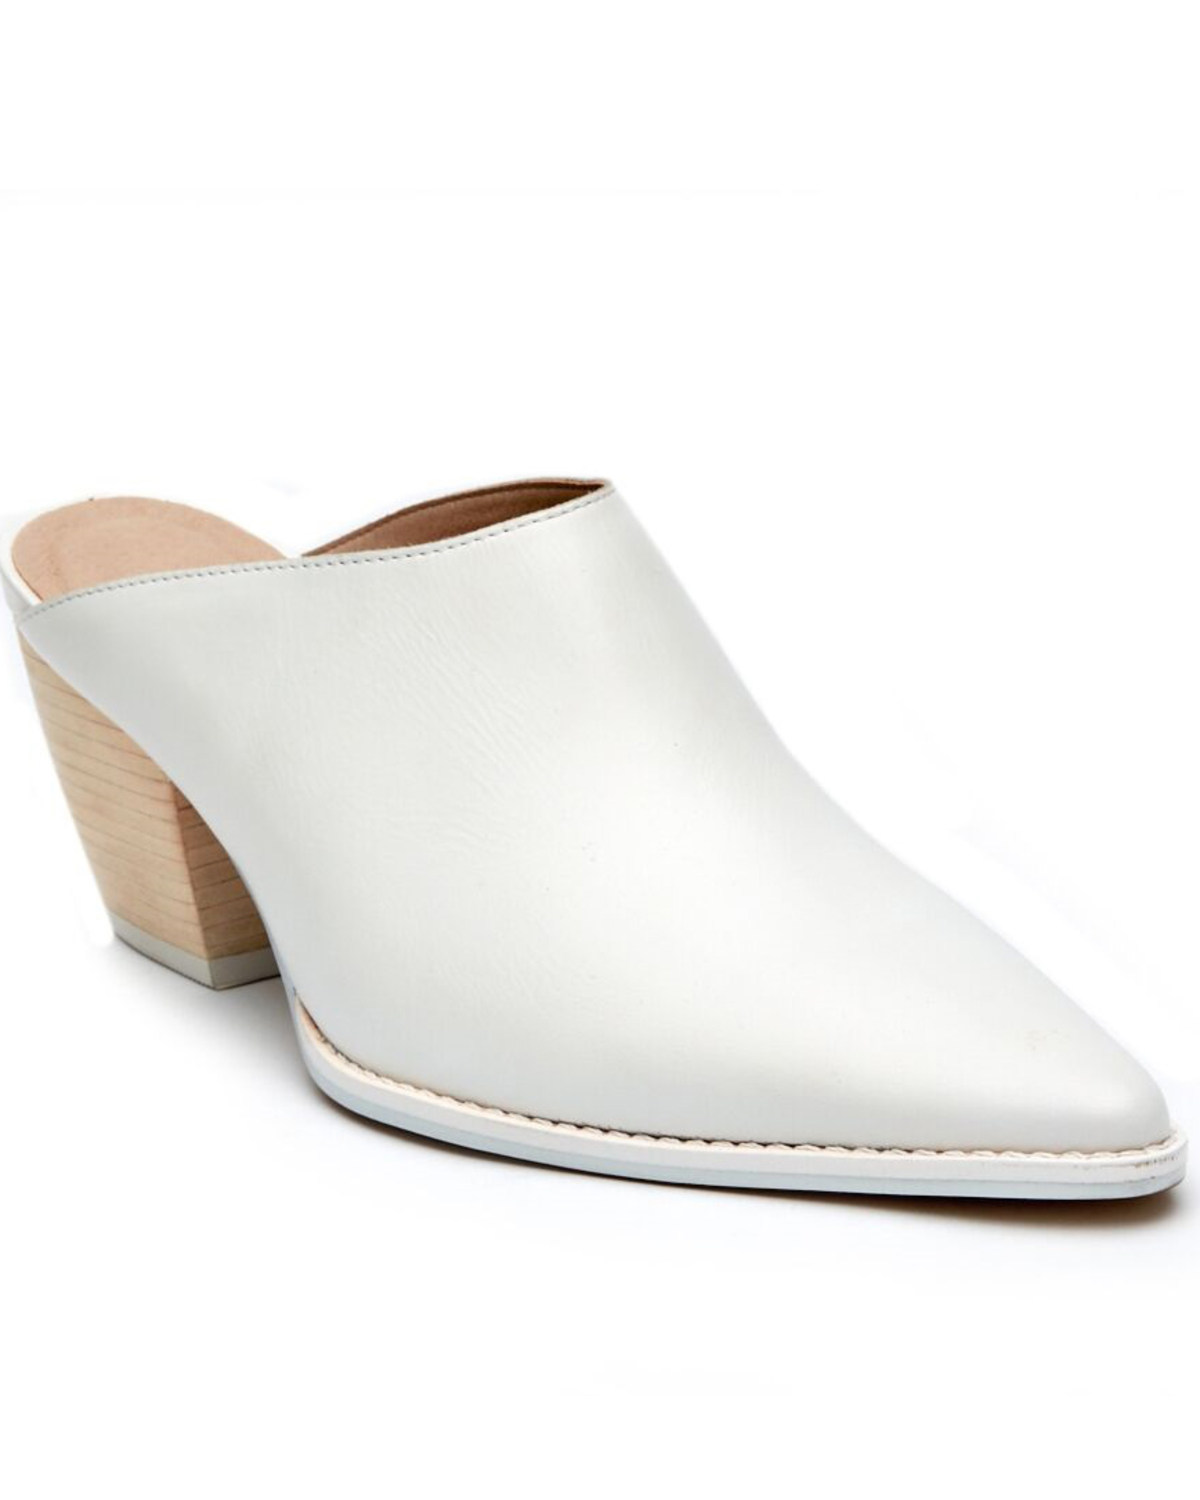 white mules shoes